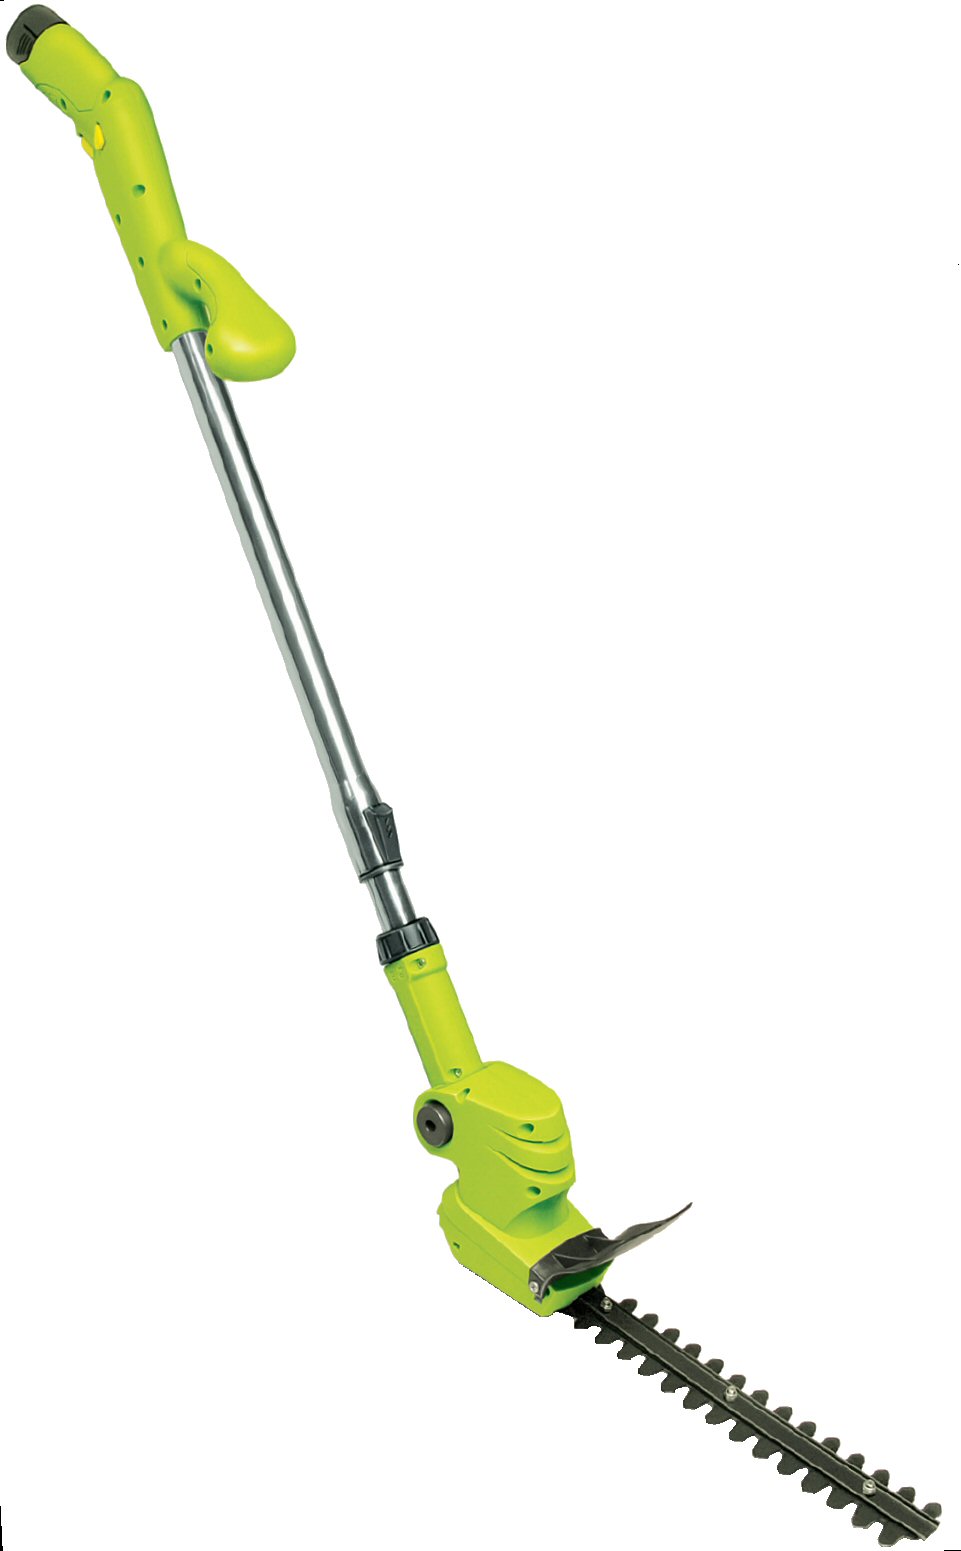 The Amazing 2-in-1 Cordless Grass and Hedge Cutter